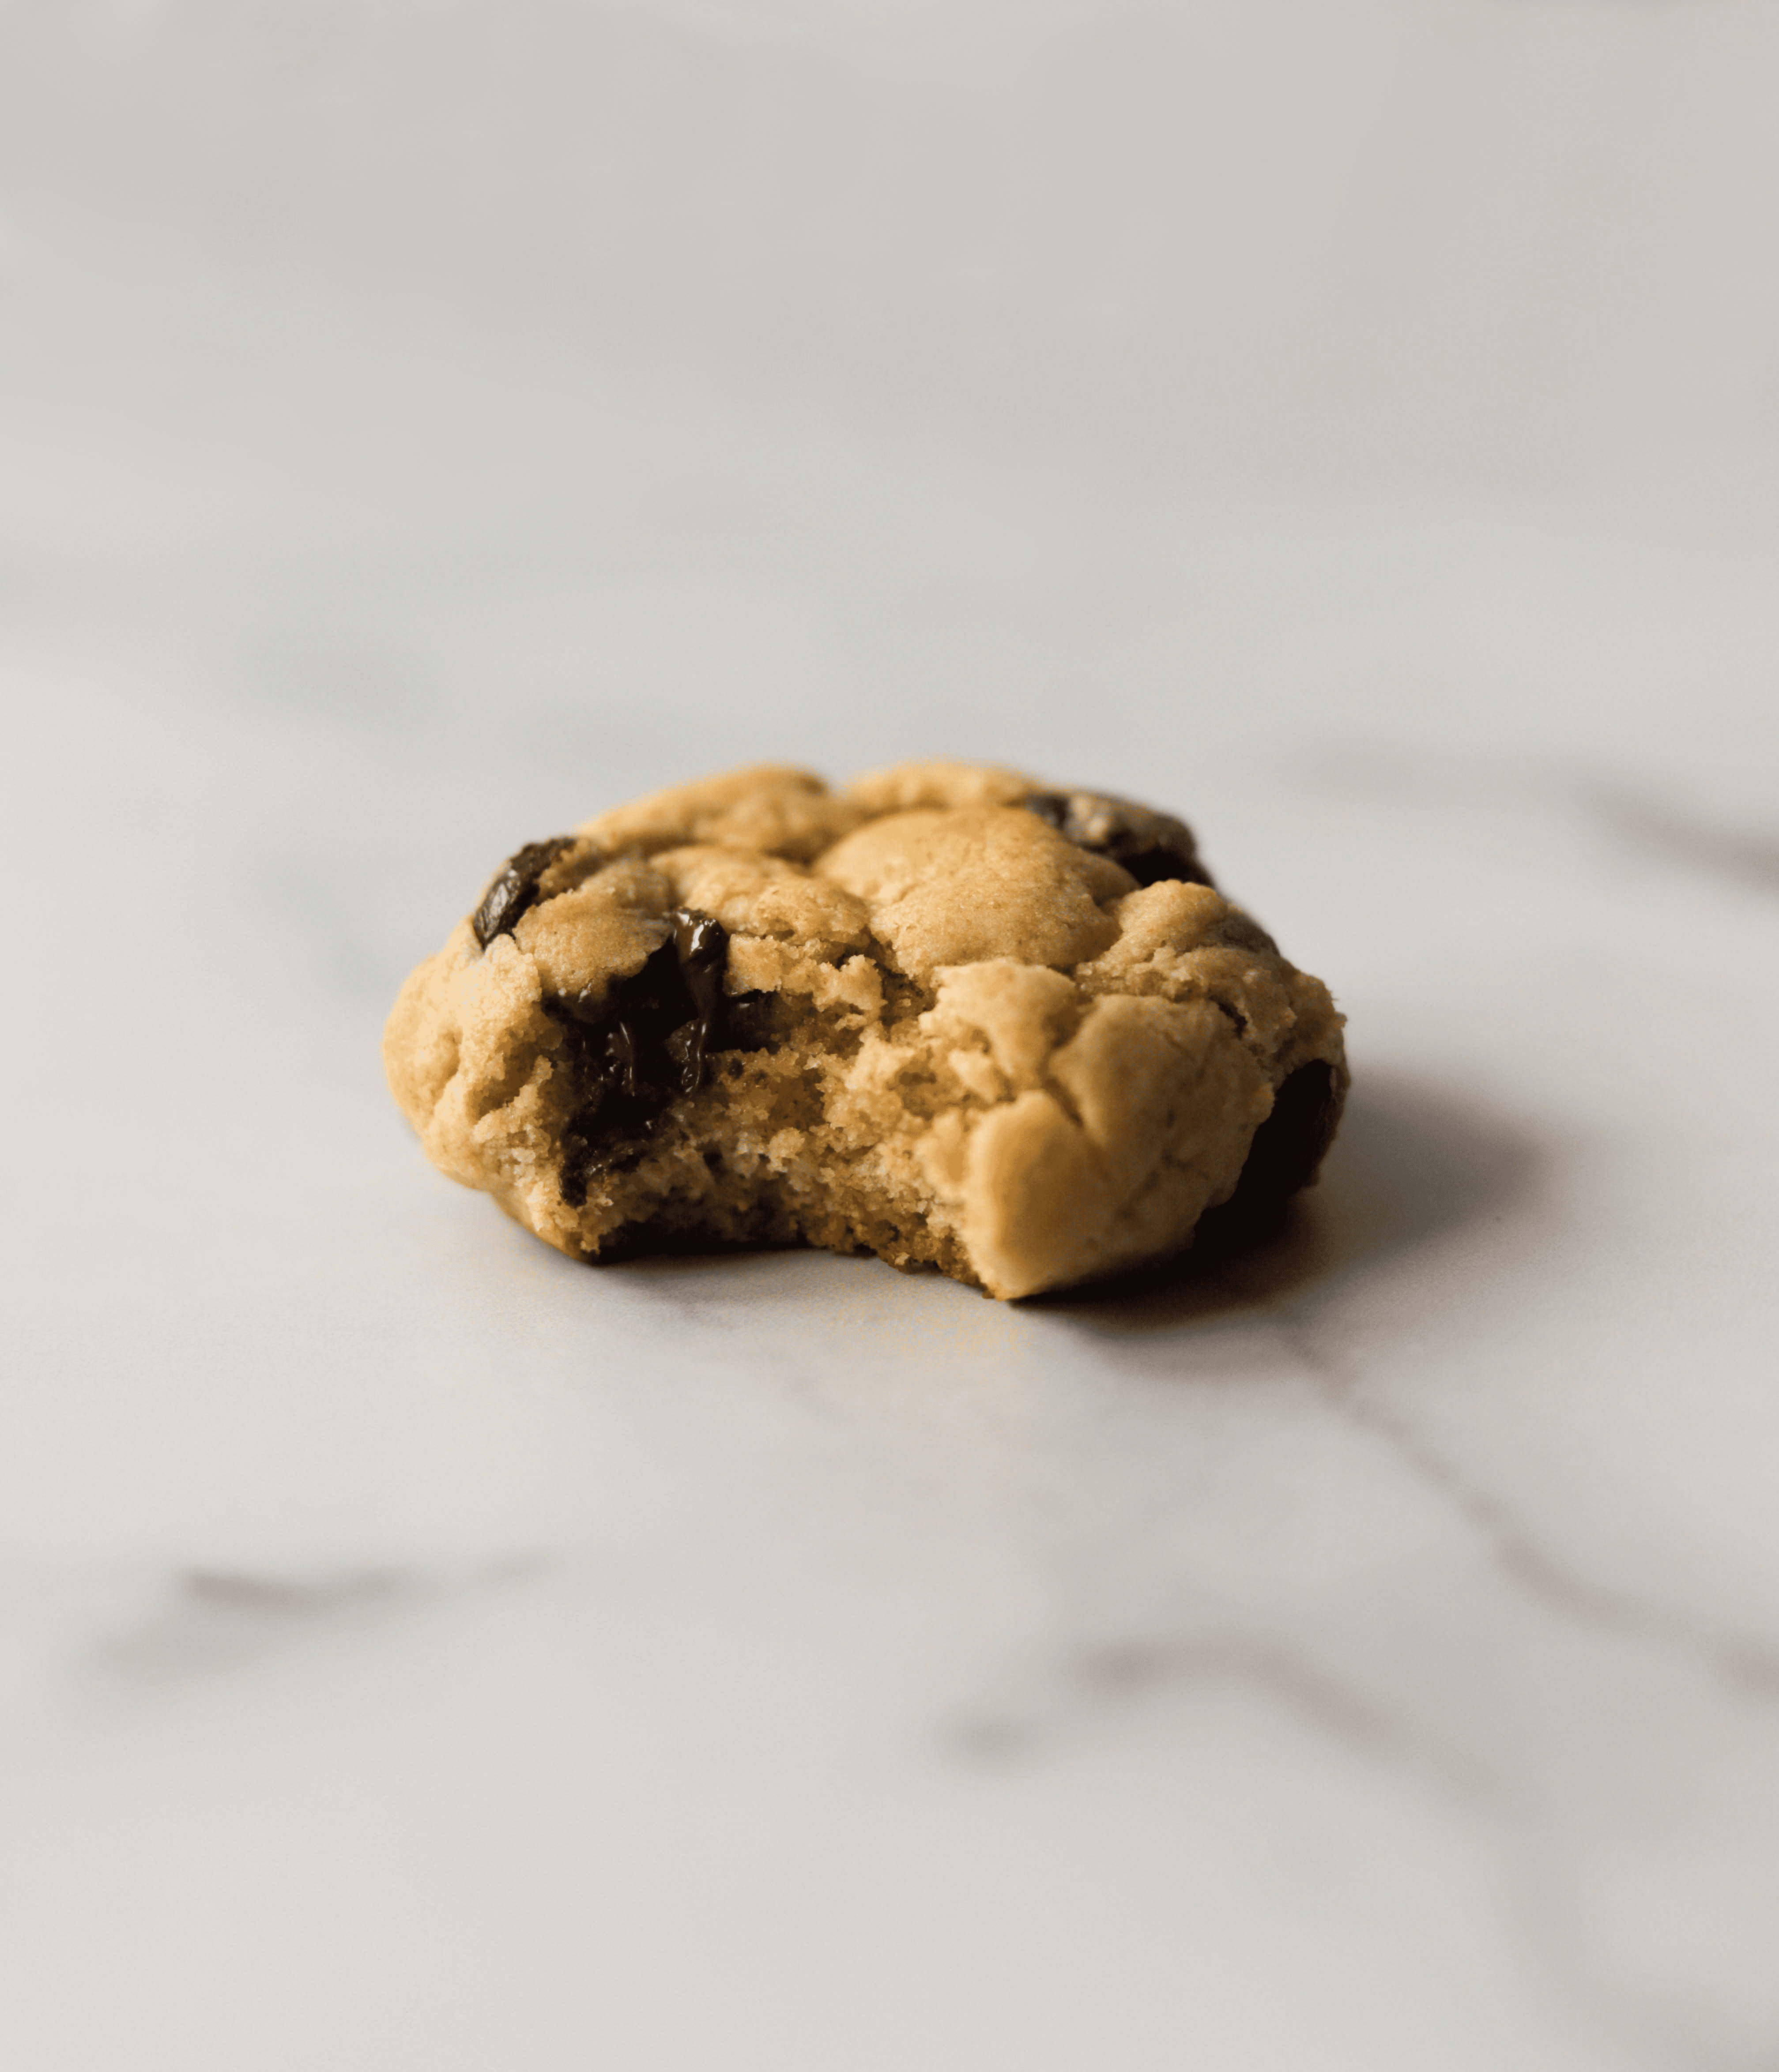 A side shot of a single miso chocolate chip cookie with a bite taken out of it.